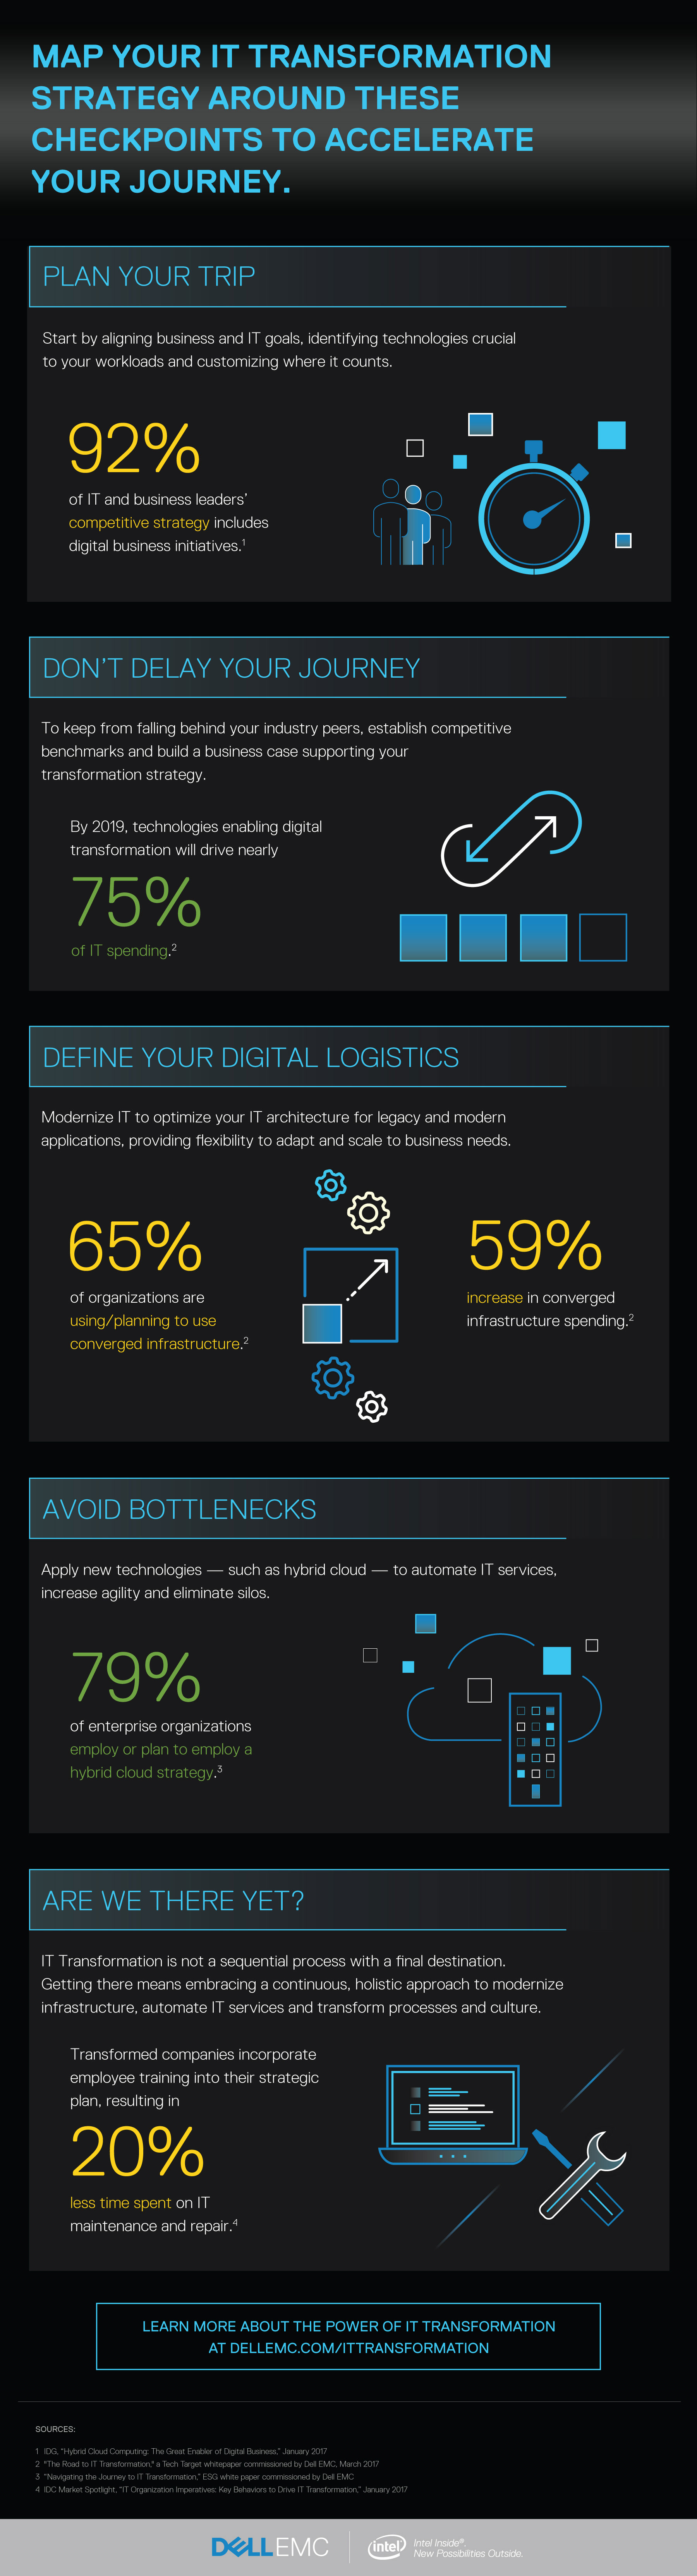 Mapping Your IT Transformation Infographic Image